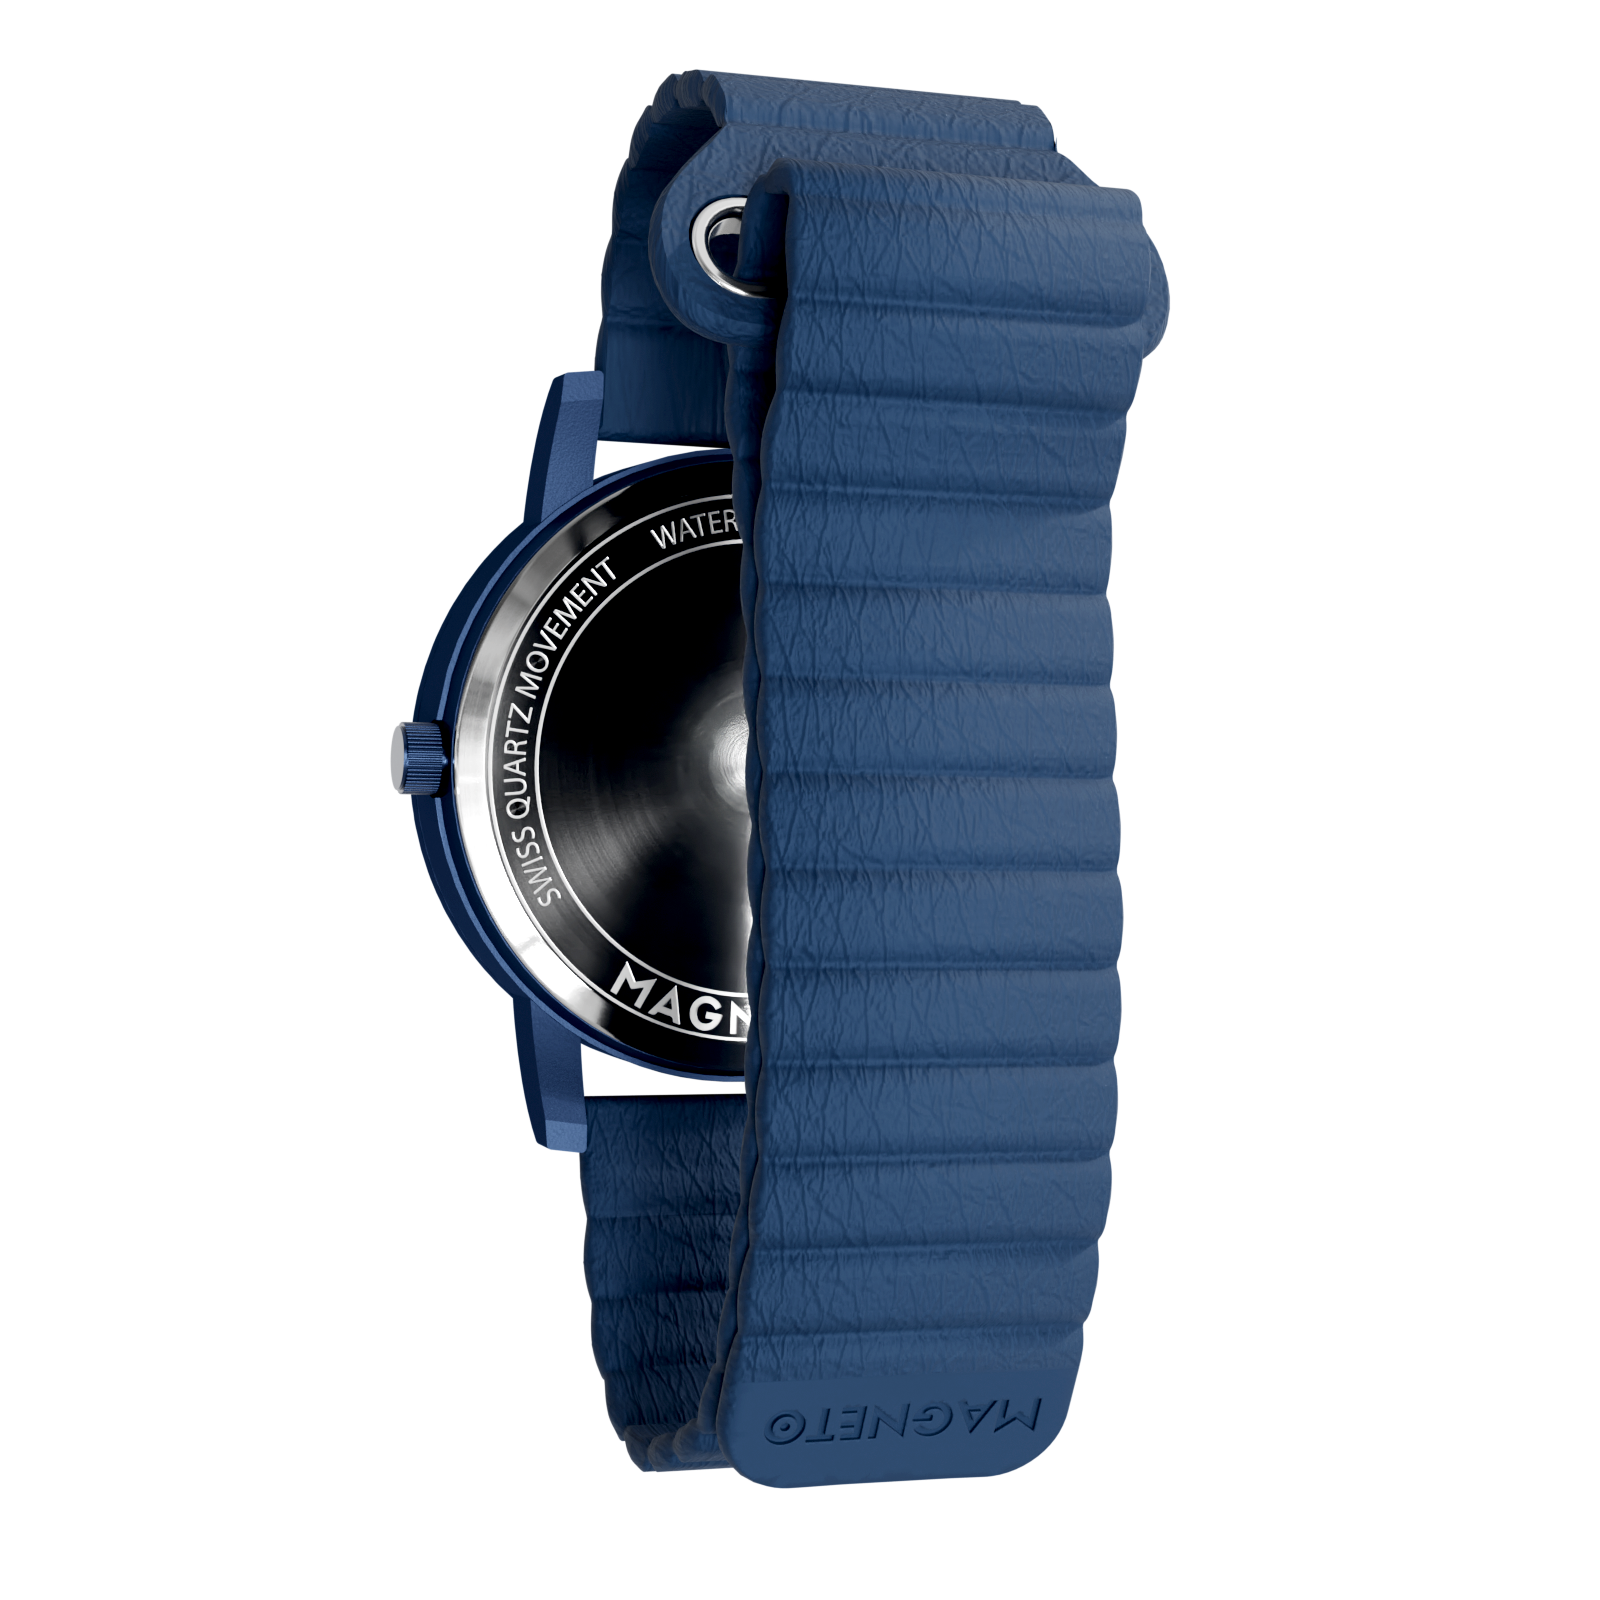 Magneto Watch | Supreme Gifts and Ideas